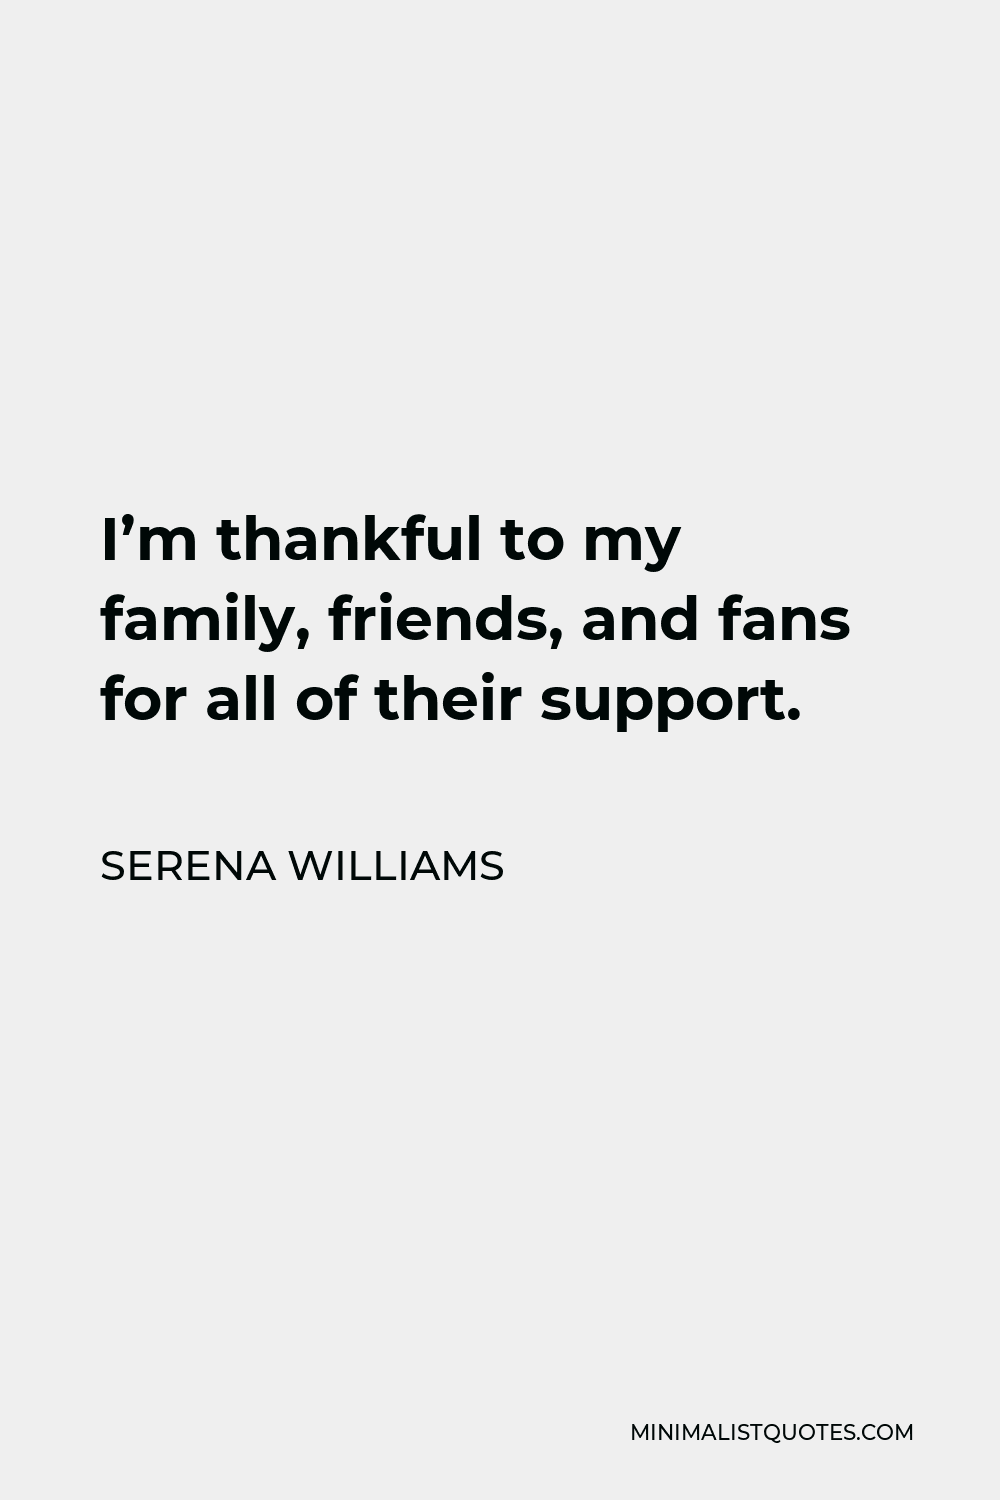 Serena Williams Quote - I’m thankful to my family, friends, and fans for all of their support.